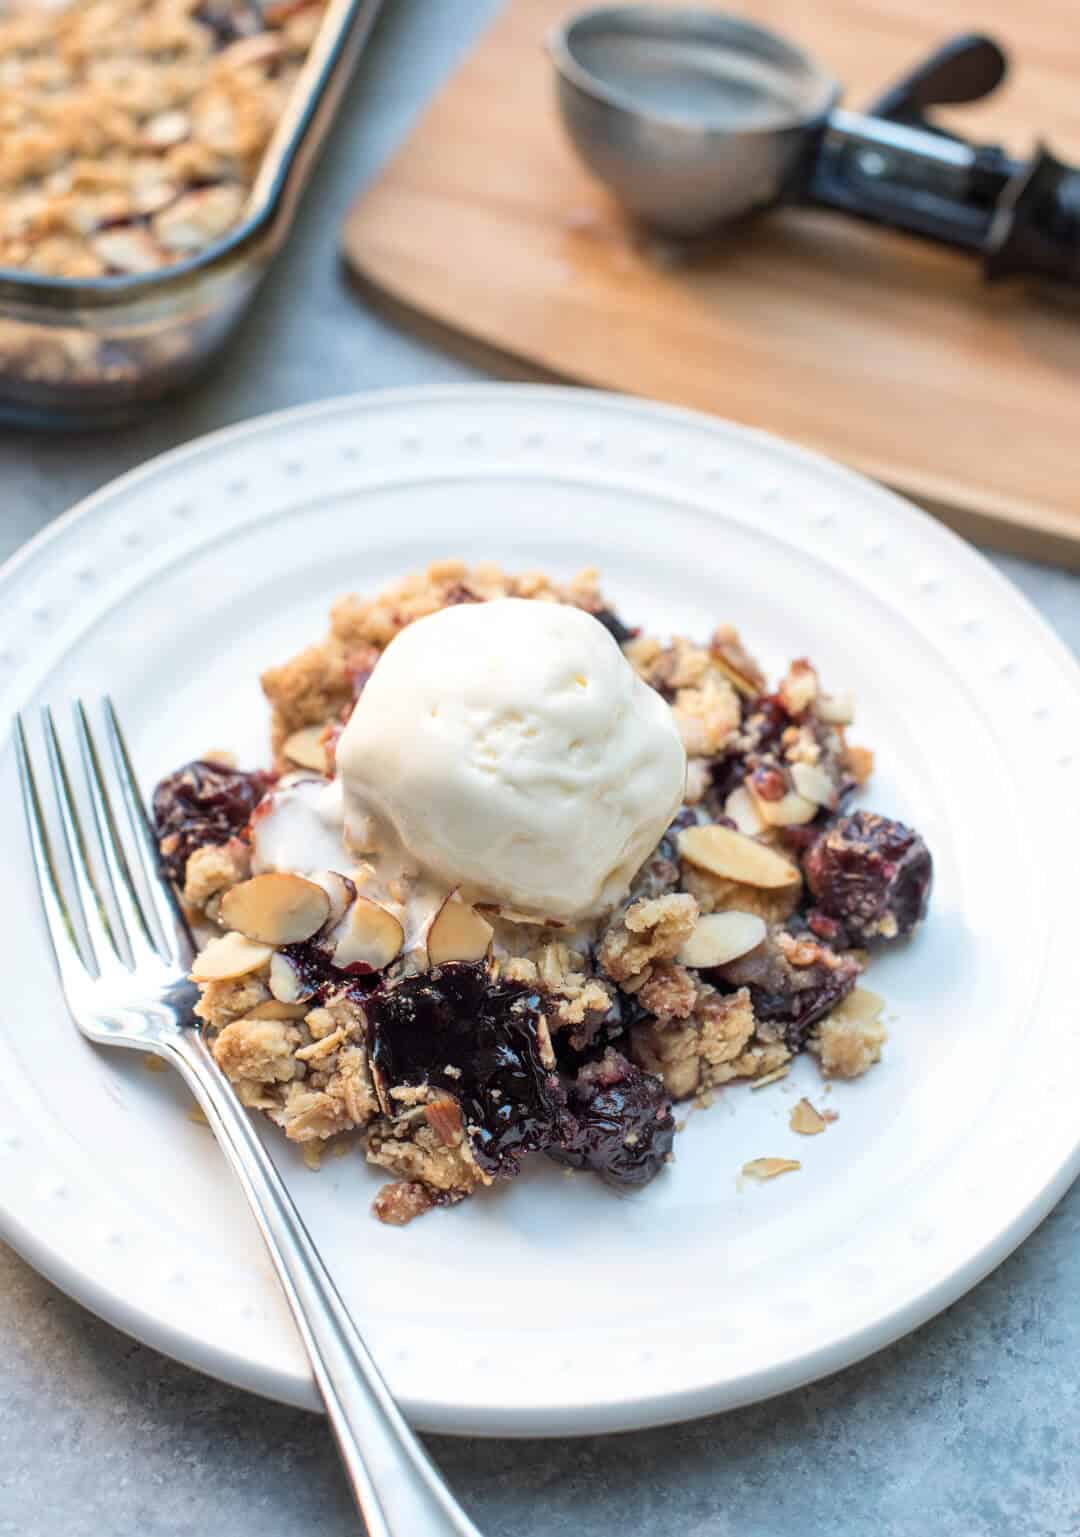 A serving of Cherry Crisp on a white plate with a scoop of ice cream and a fork.